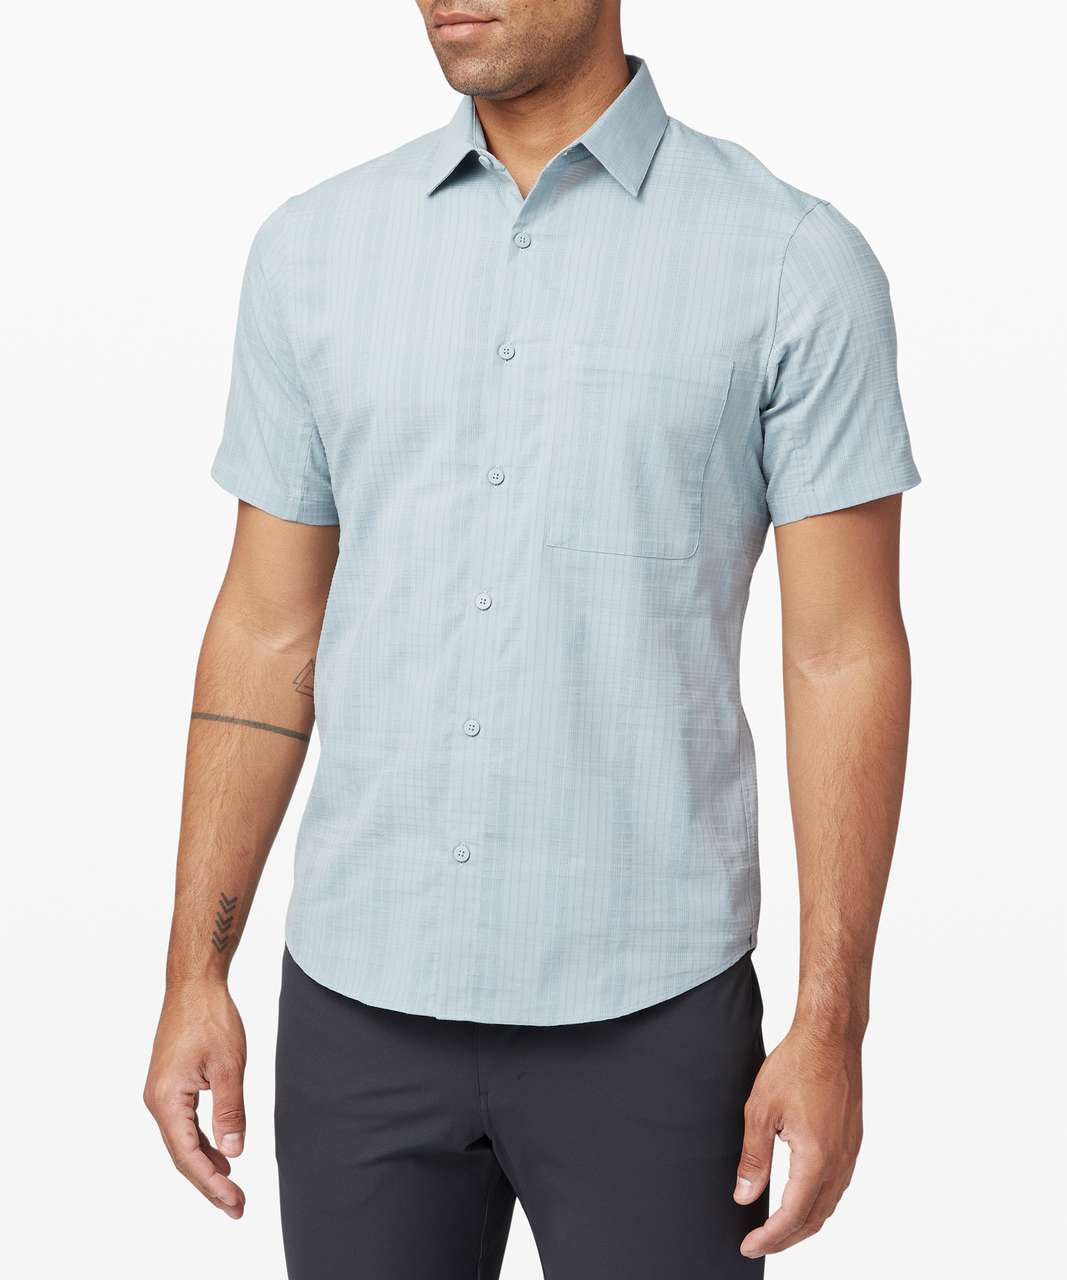 Lululemon Down to the Wire Short Sleeve Shirt - Blue Cast